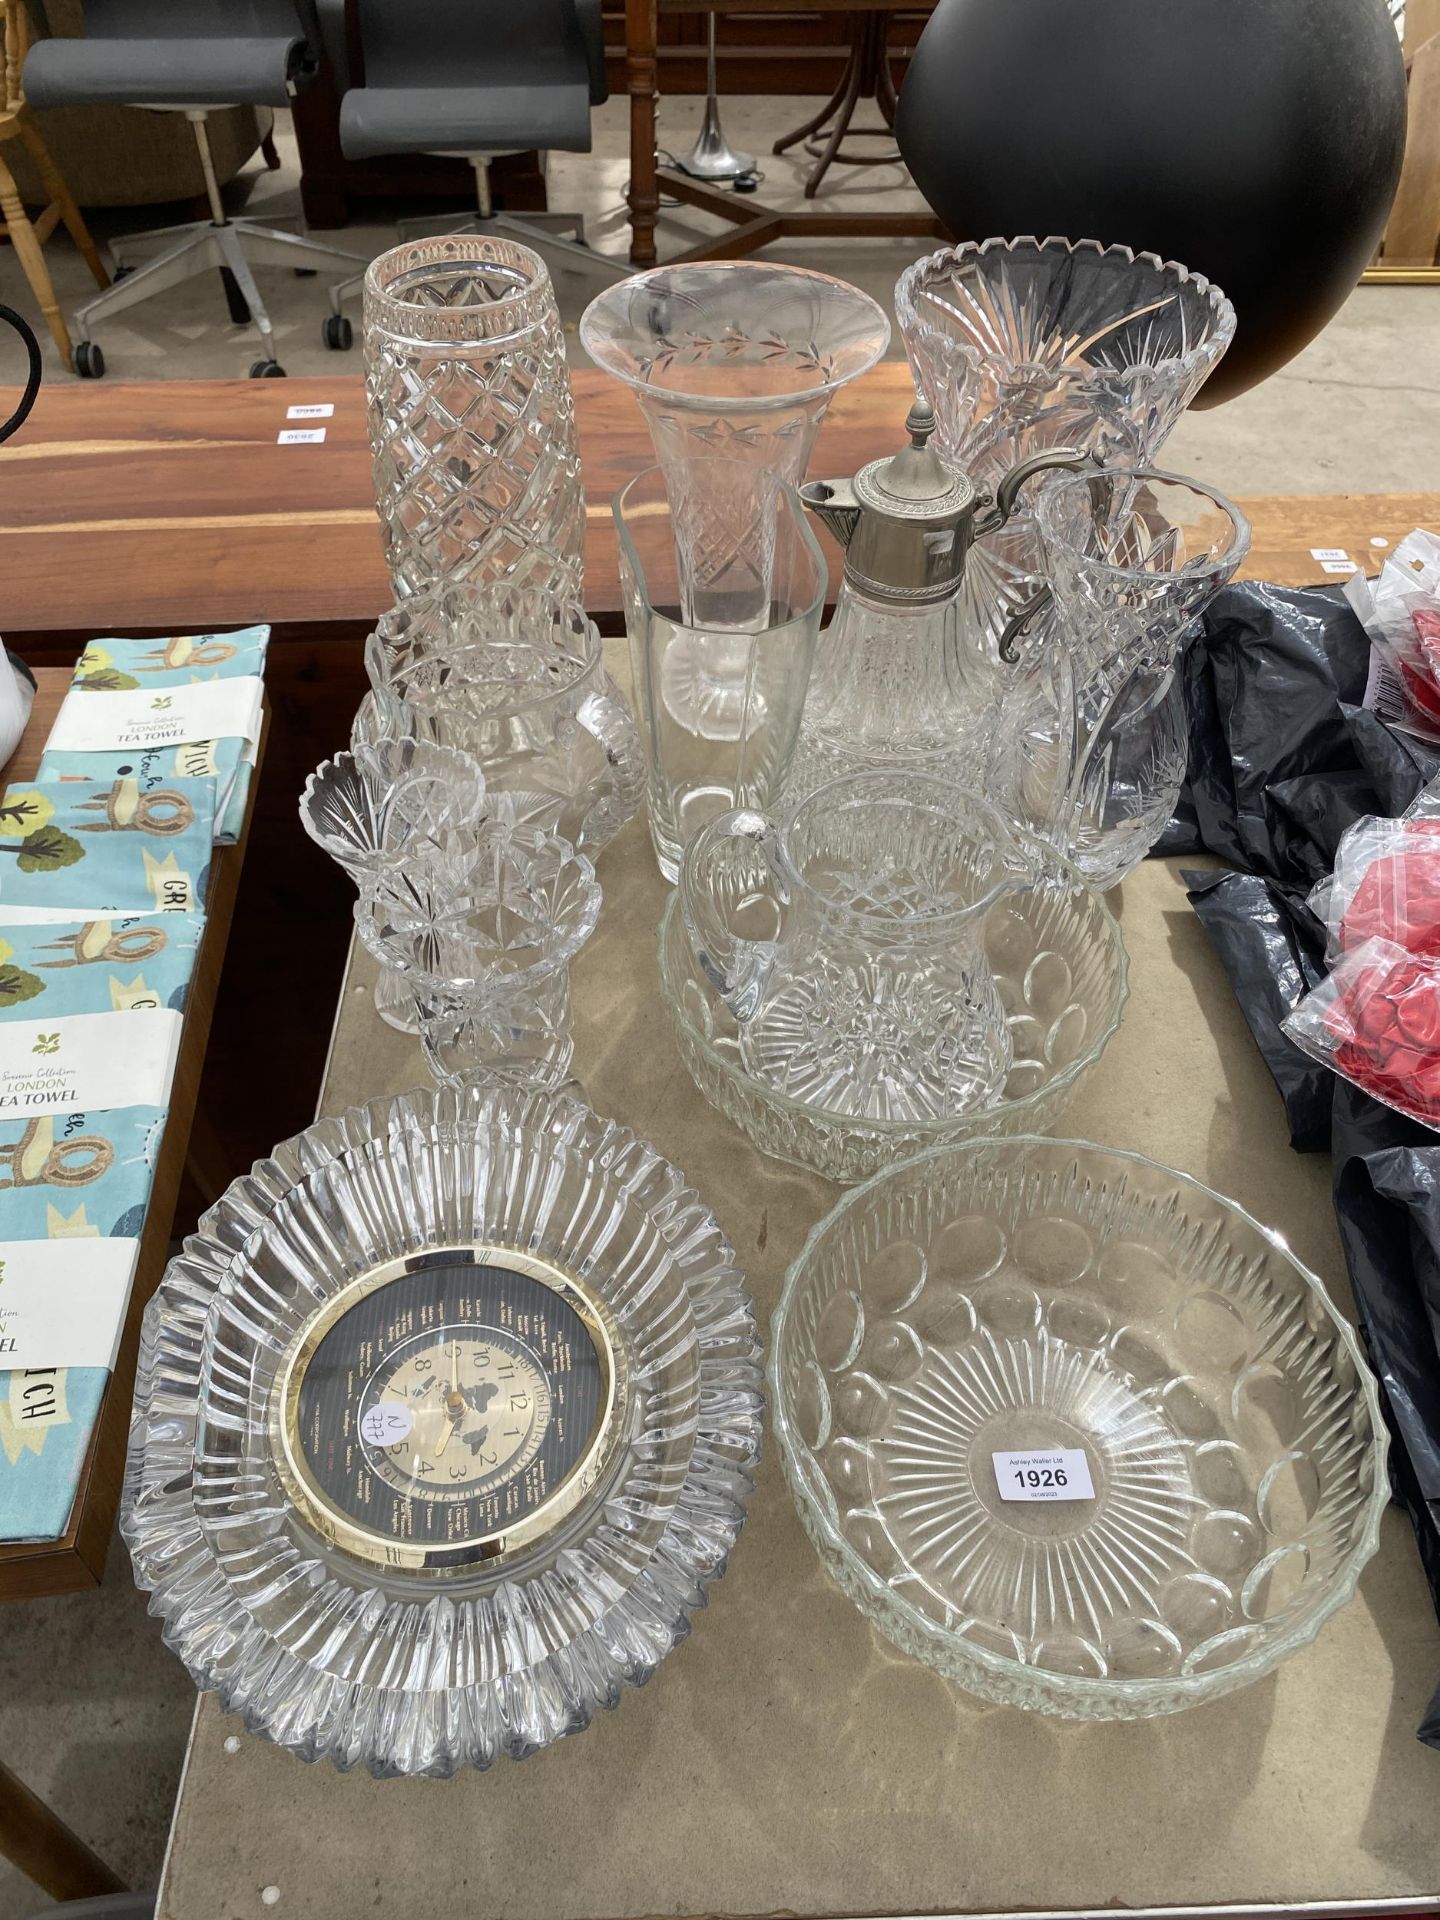 AN ASSORTMENT OF CUT GLASS WARE TO INCLUDE A WORLD CLOCK, A CLARET JUG AND VASES ETC